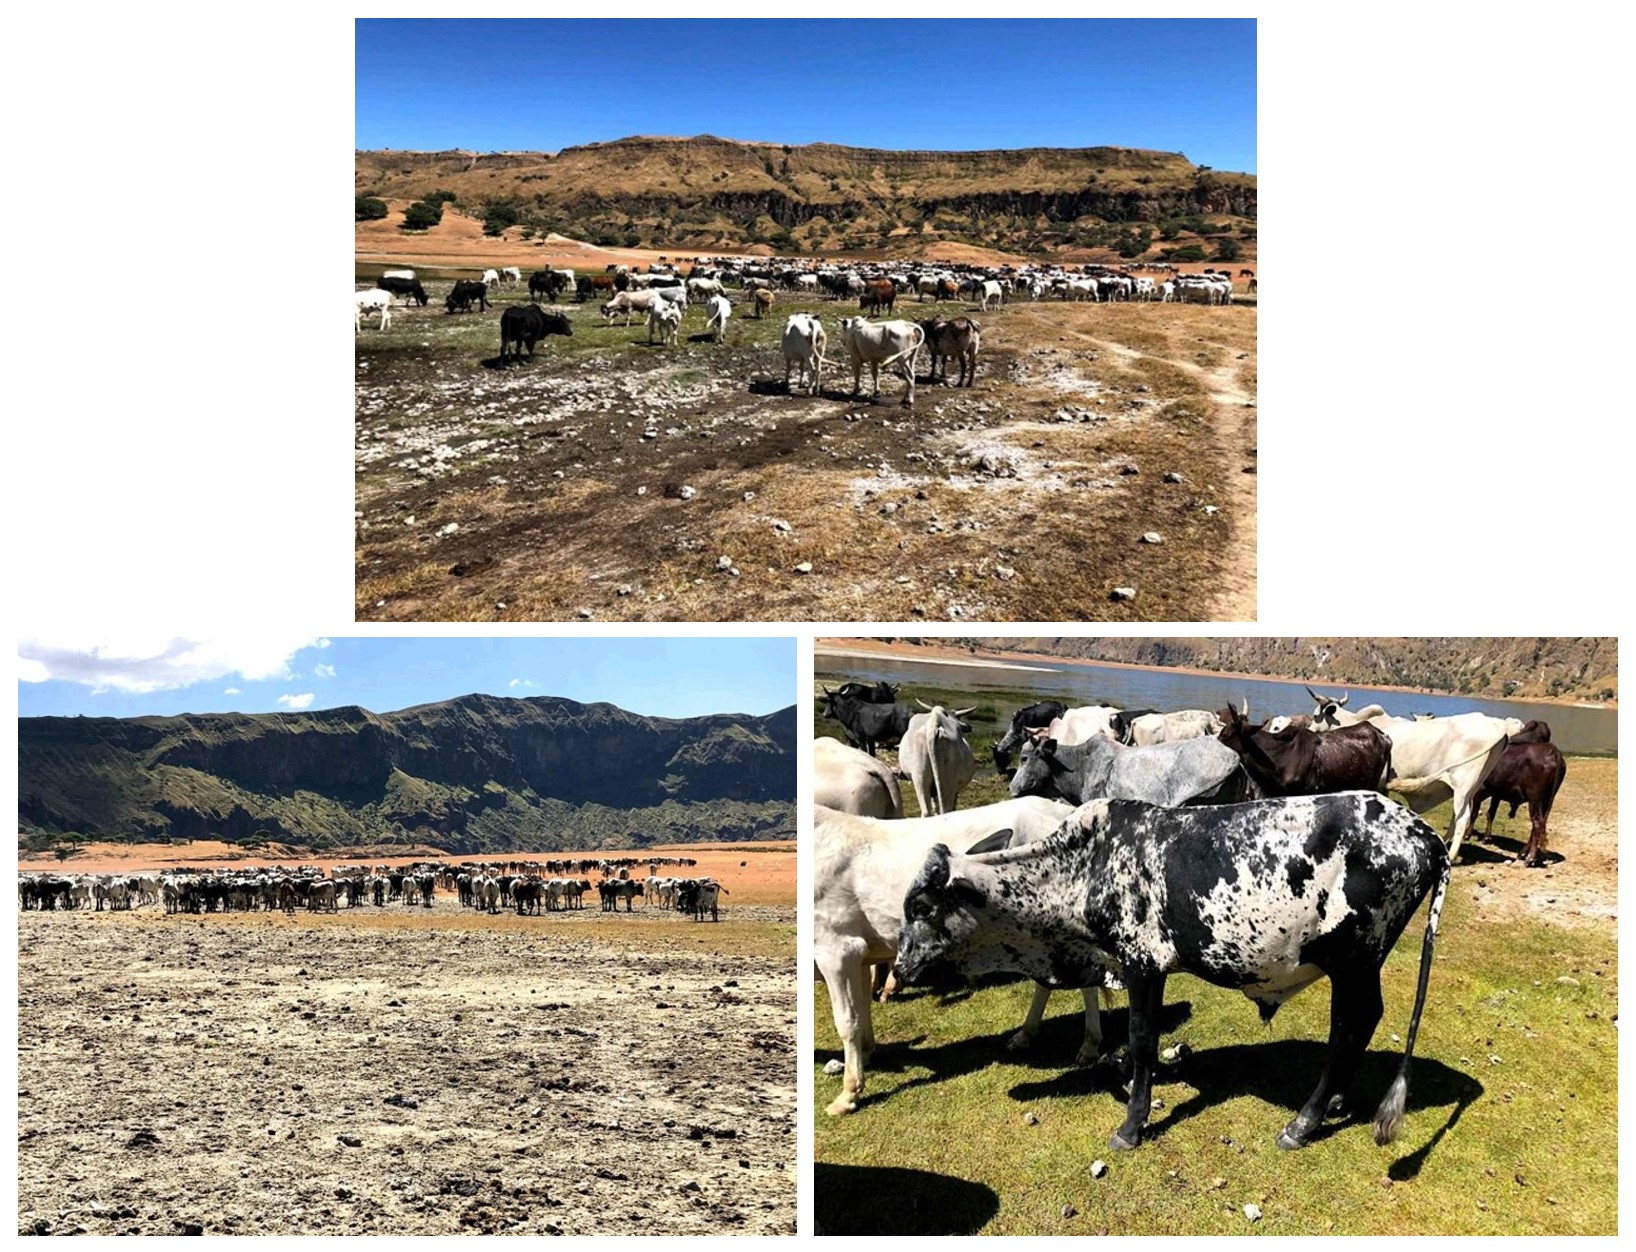 Three images showing a herd of cattle grazing at Deriba Lake, Sudan.